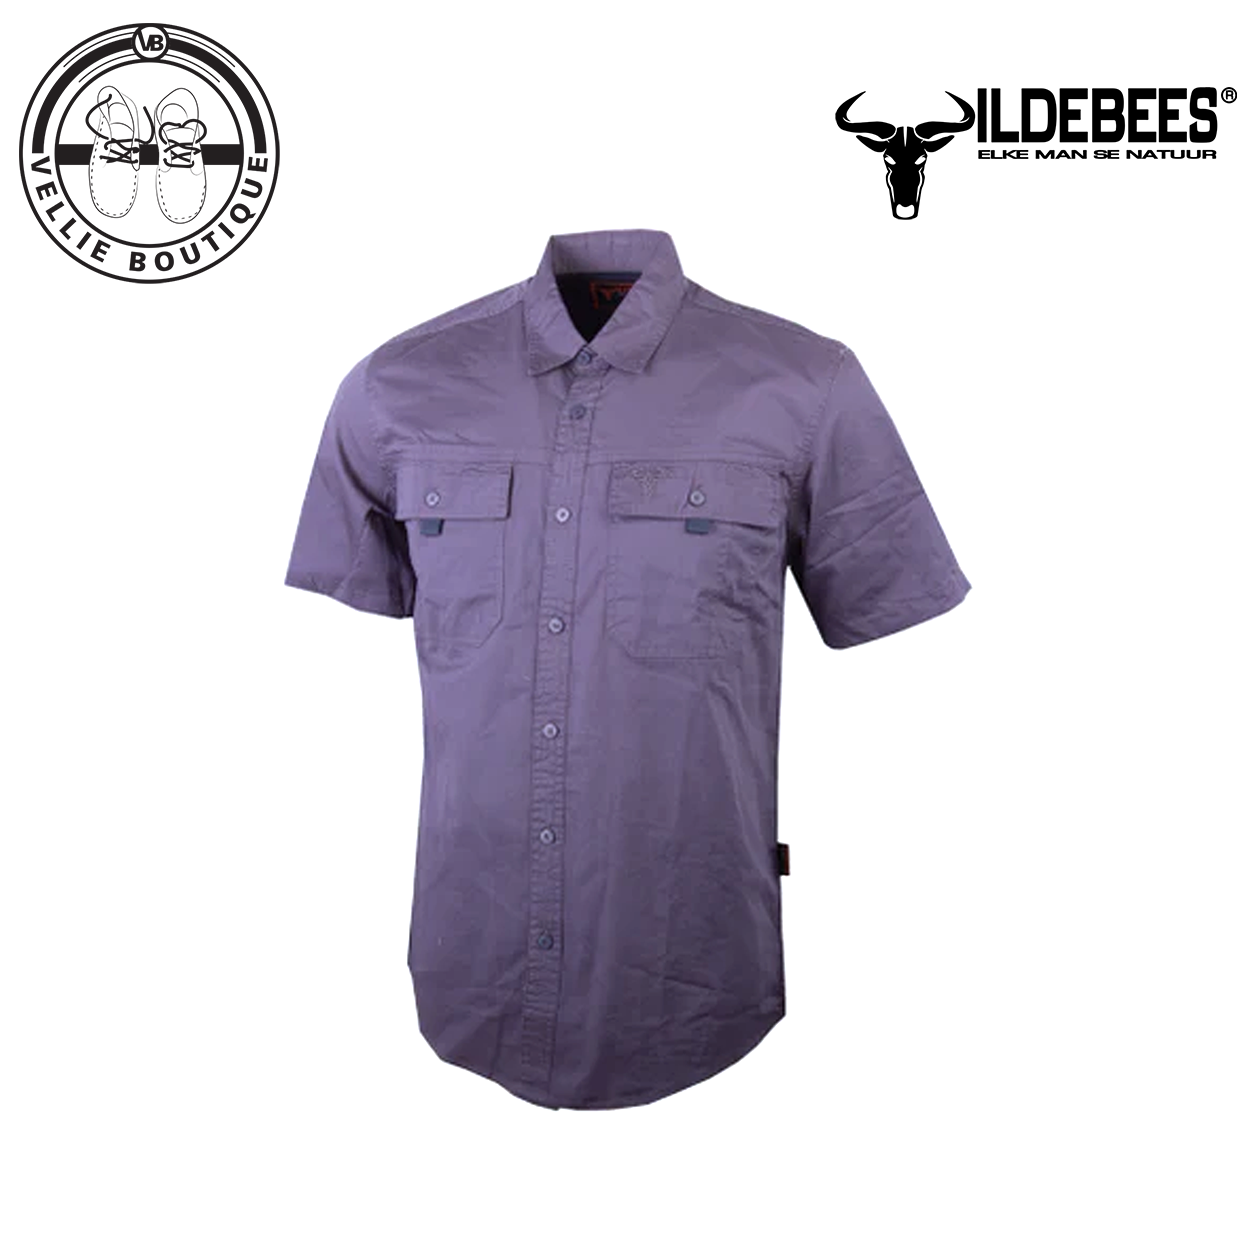 Wildebees Mens Casual Short Sleeve Vented Twill Shirt - Steel Blue